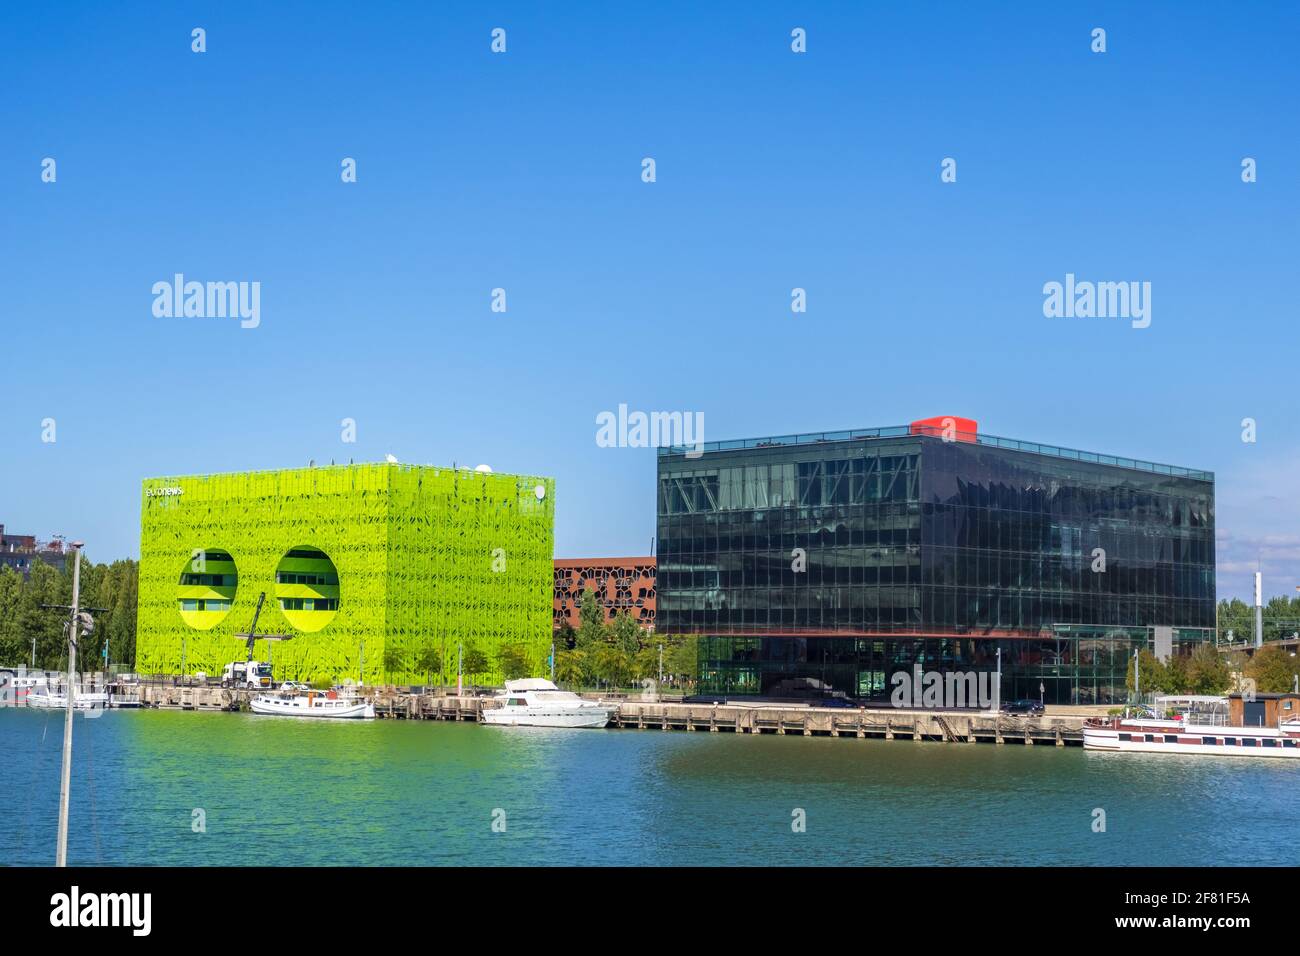 Lyon, France - August 22, 2019: Confluence district in Lyon, headquarters of the Euronews television channel and GL Events Head office on the Rambaud Stock Photo